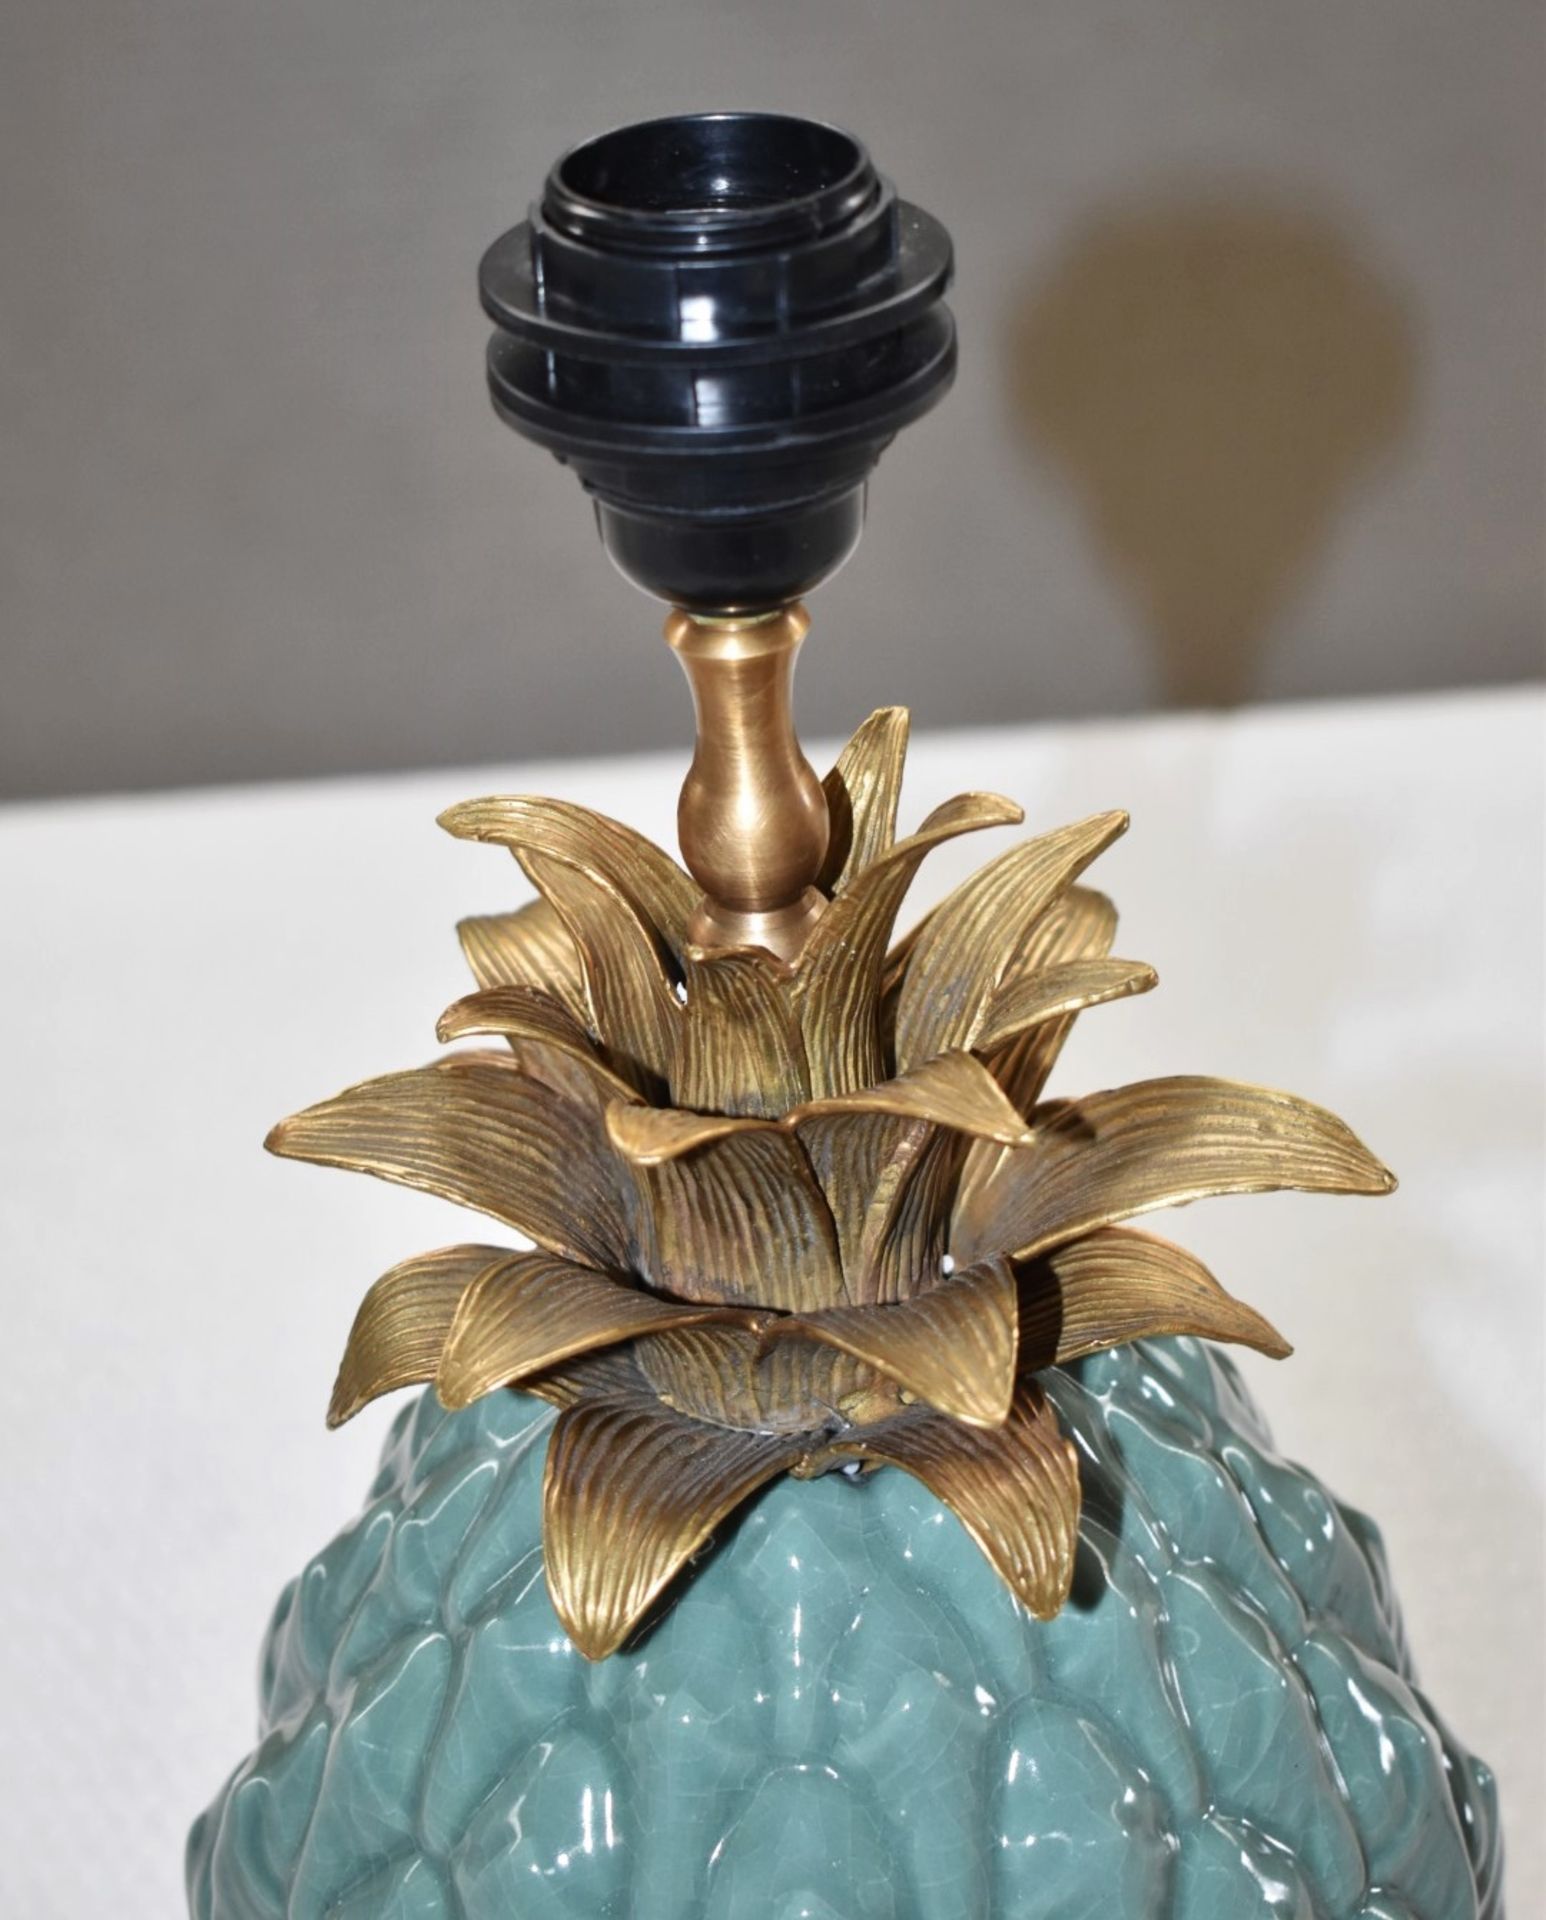 1 x HOUSE OF HACKNEY 'Ananas' Ceramic Pineapple Lamp Stand In Pale Green - Original RRP £545.00 - Image 4 of 8